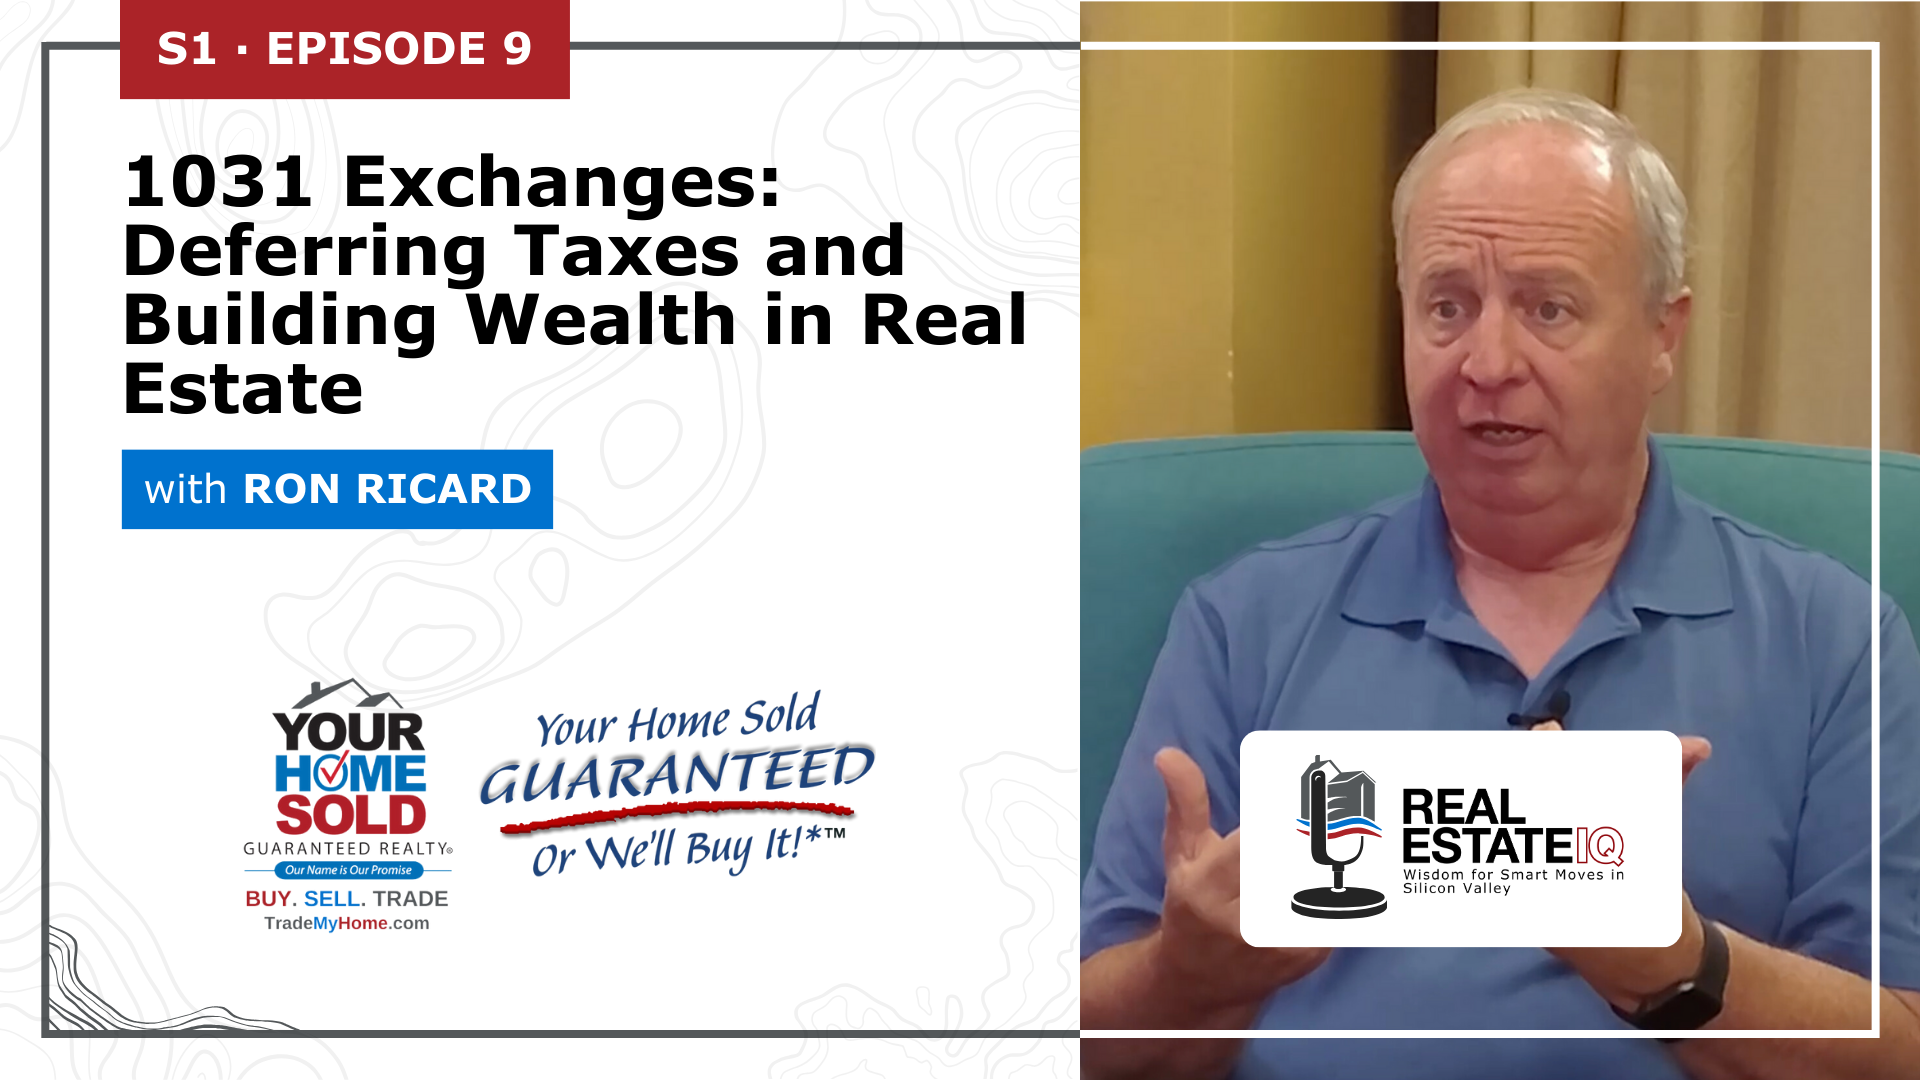 1031 Exchanges: Deferring Taxes and Building Wealth in Real Estate